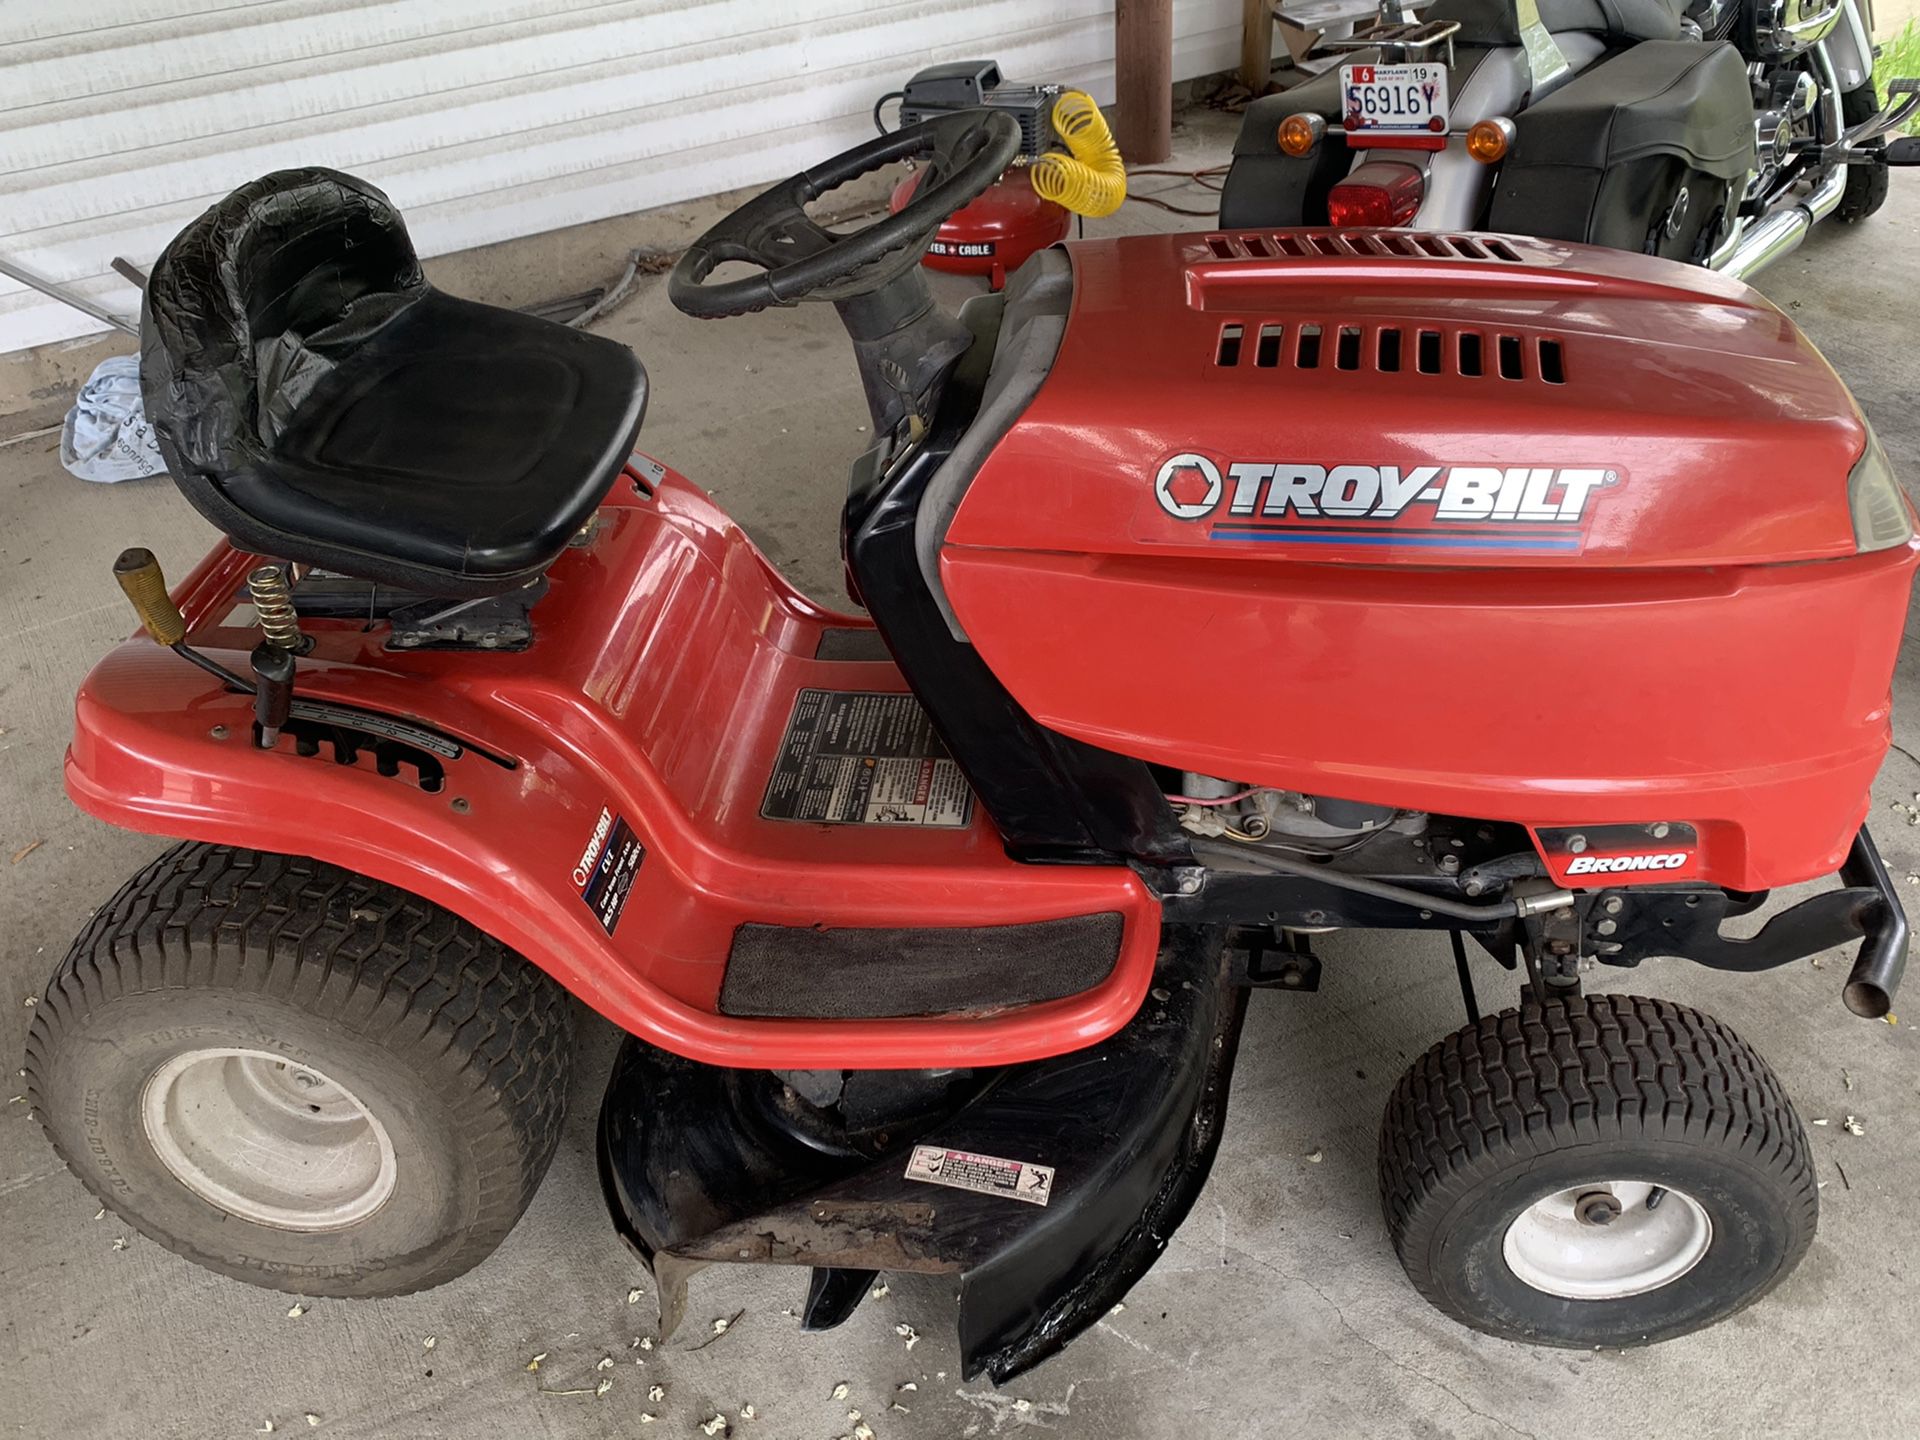 Troy built lawn tractor